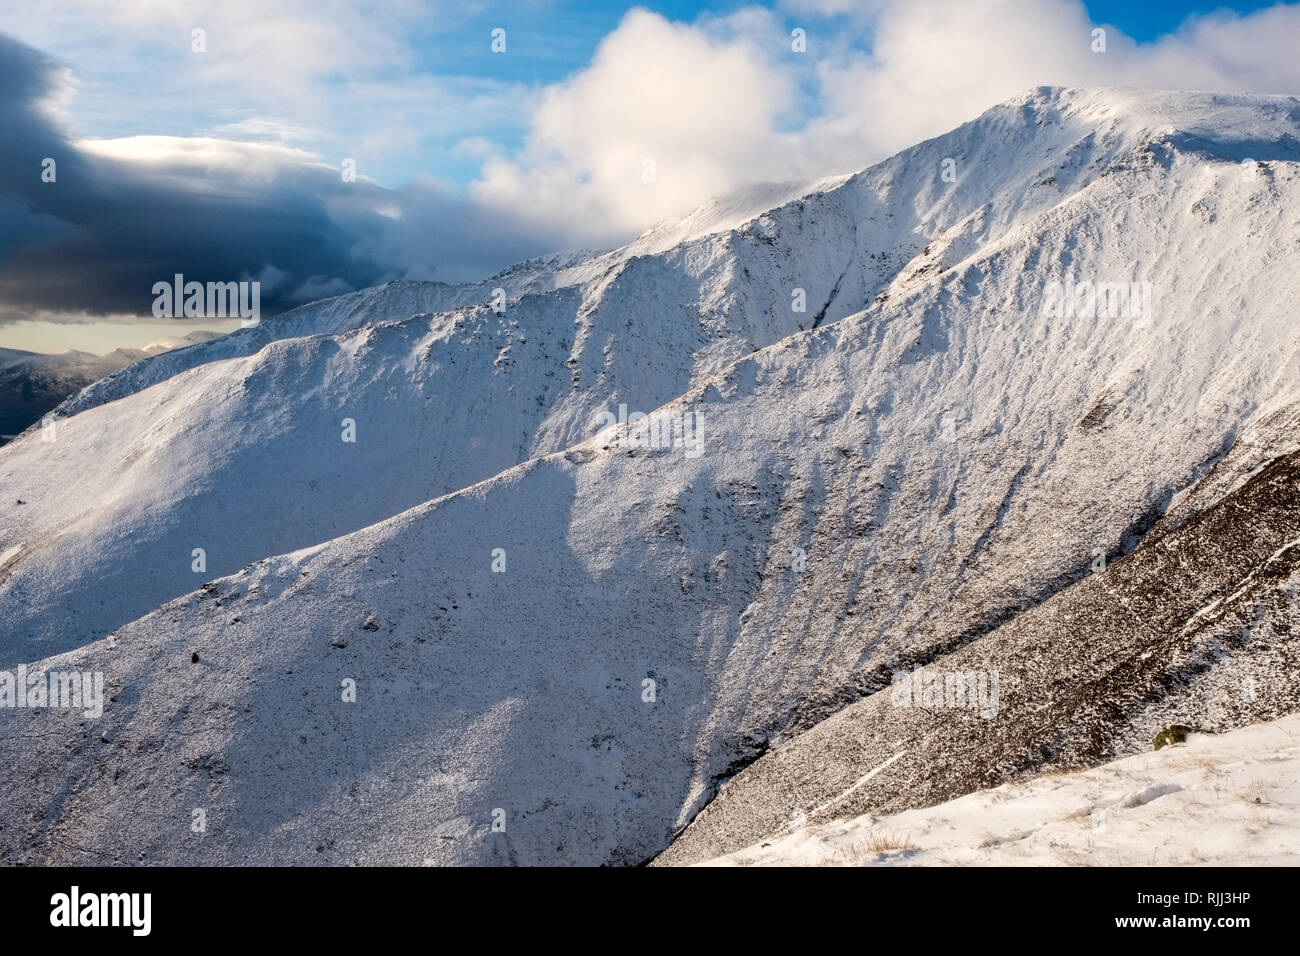 The ridges of Blencathra, a mountain in the Lake District National Park, Cumbria,UK., seen in winter snow Stock Photo